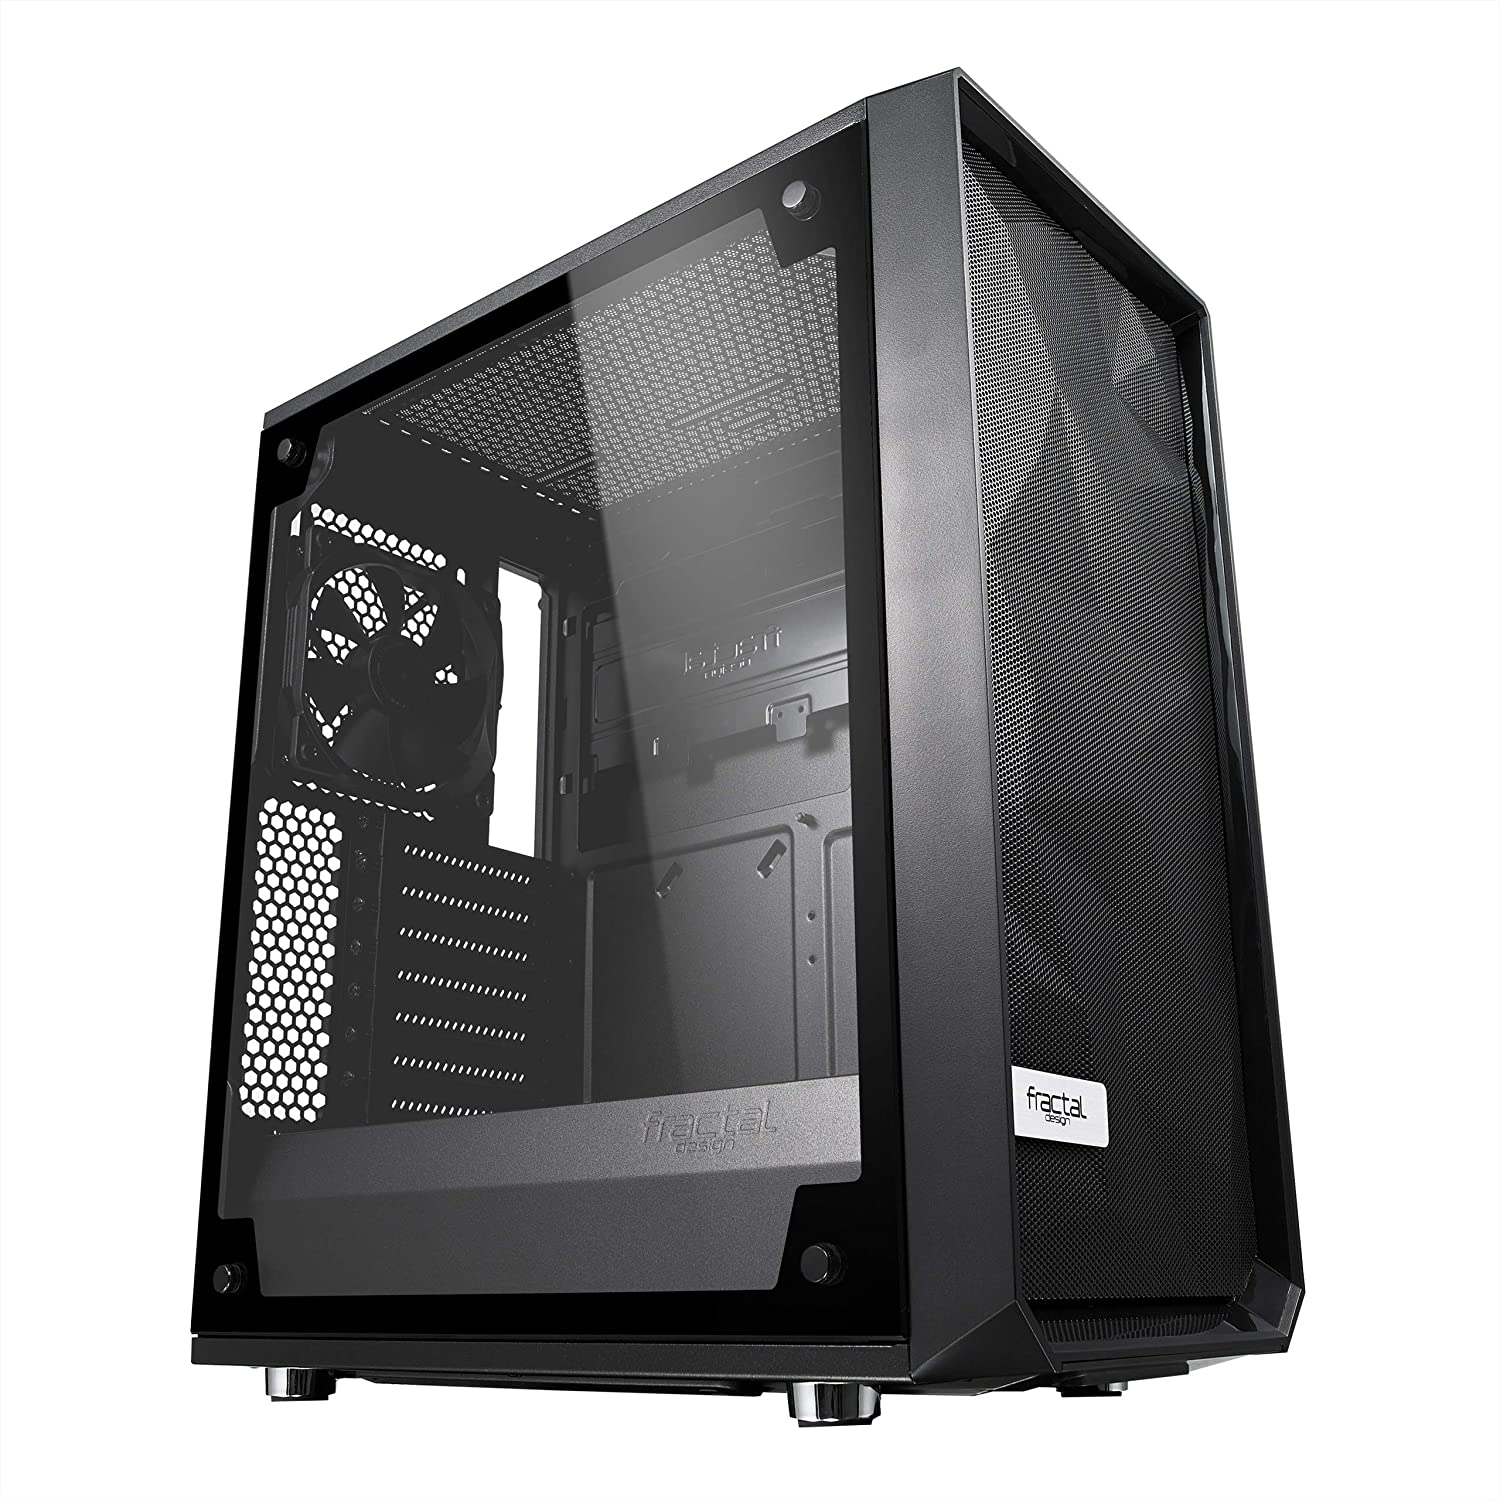 Fractal Design Meshify C - Compact Computer Case - High Performance Airflow/Cooling Modular Interior - Water-Cooling USB3.0